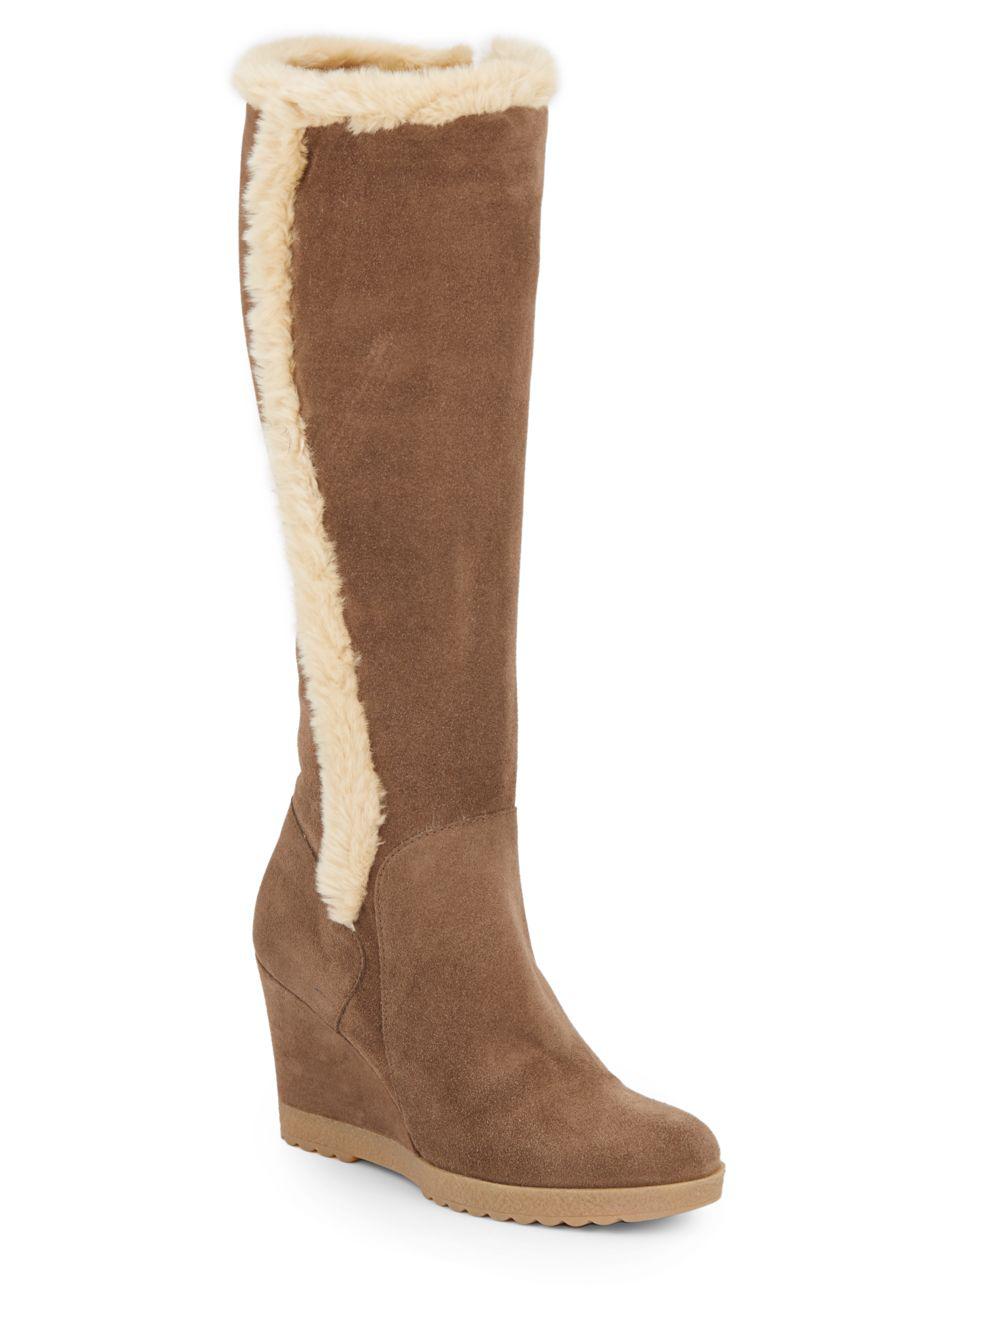 tall boots with fur trim